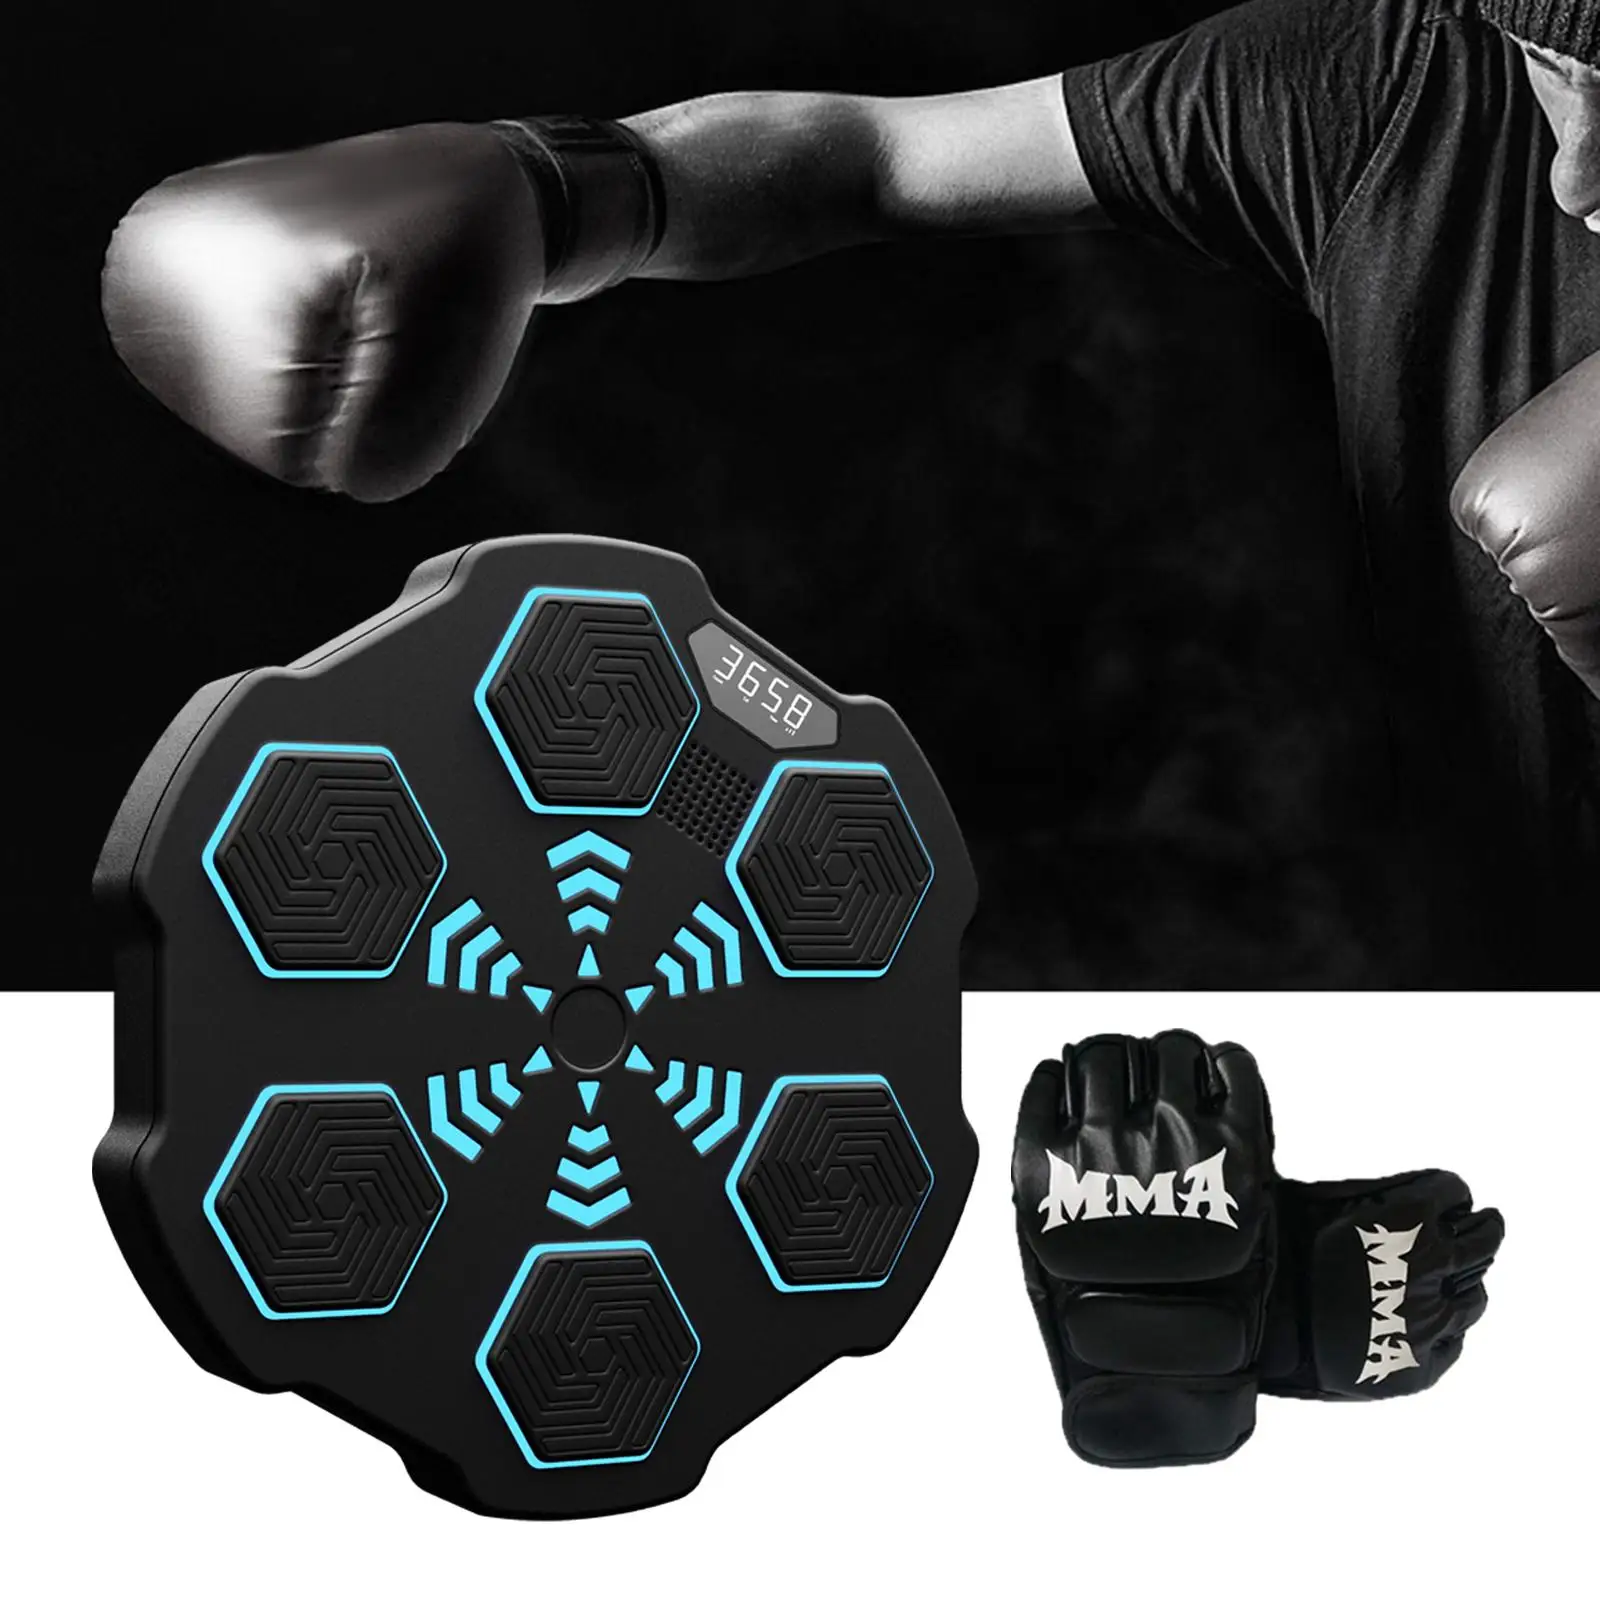 Smart Electronic Wall Target Reaction Target Relaxing Music Boxing Training Machine for Practice Kids Adults Fitness Home Youth